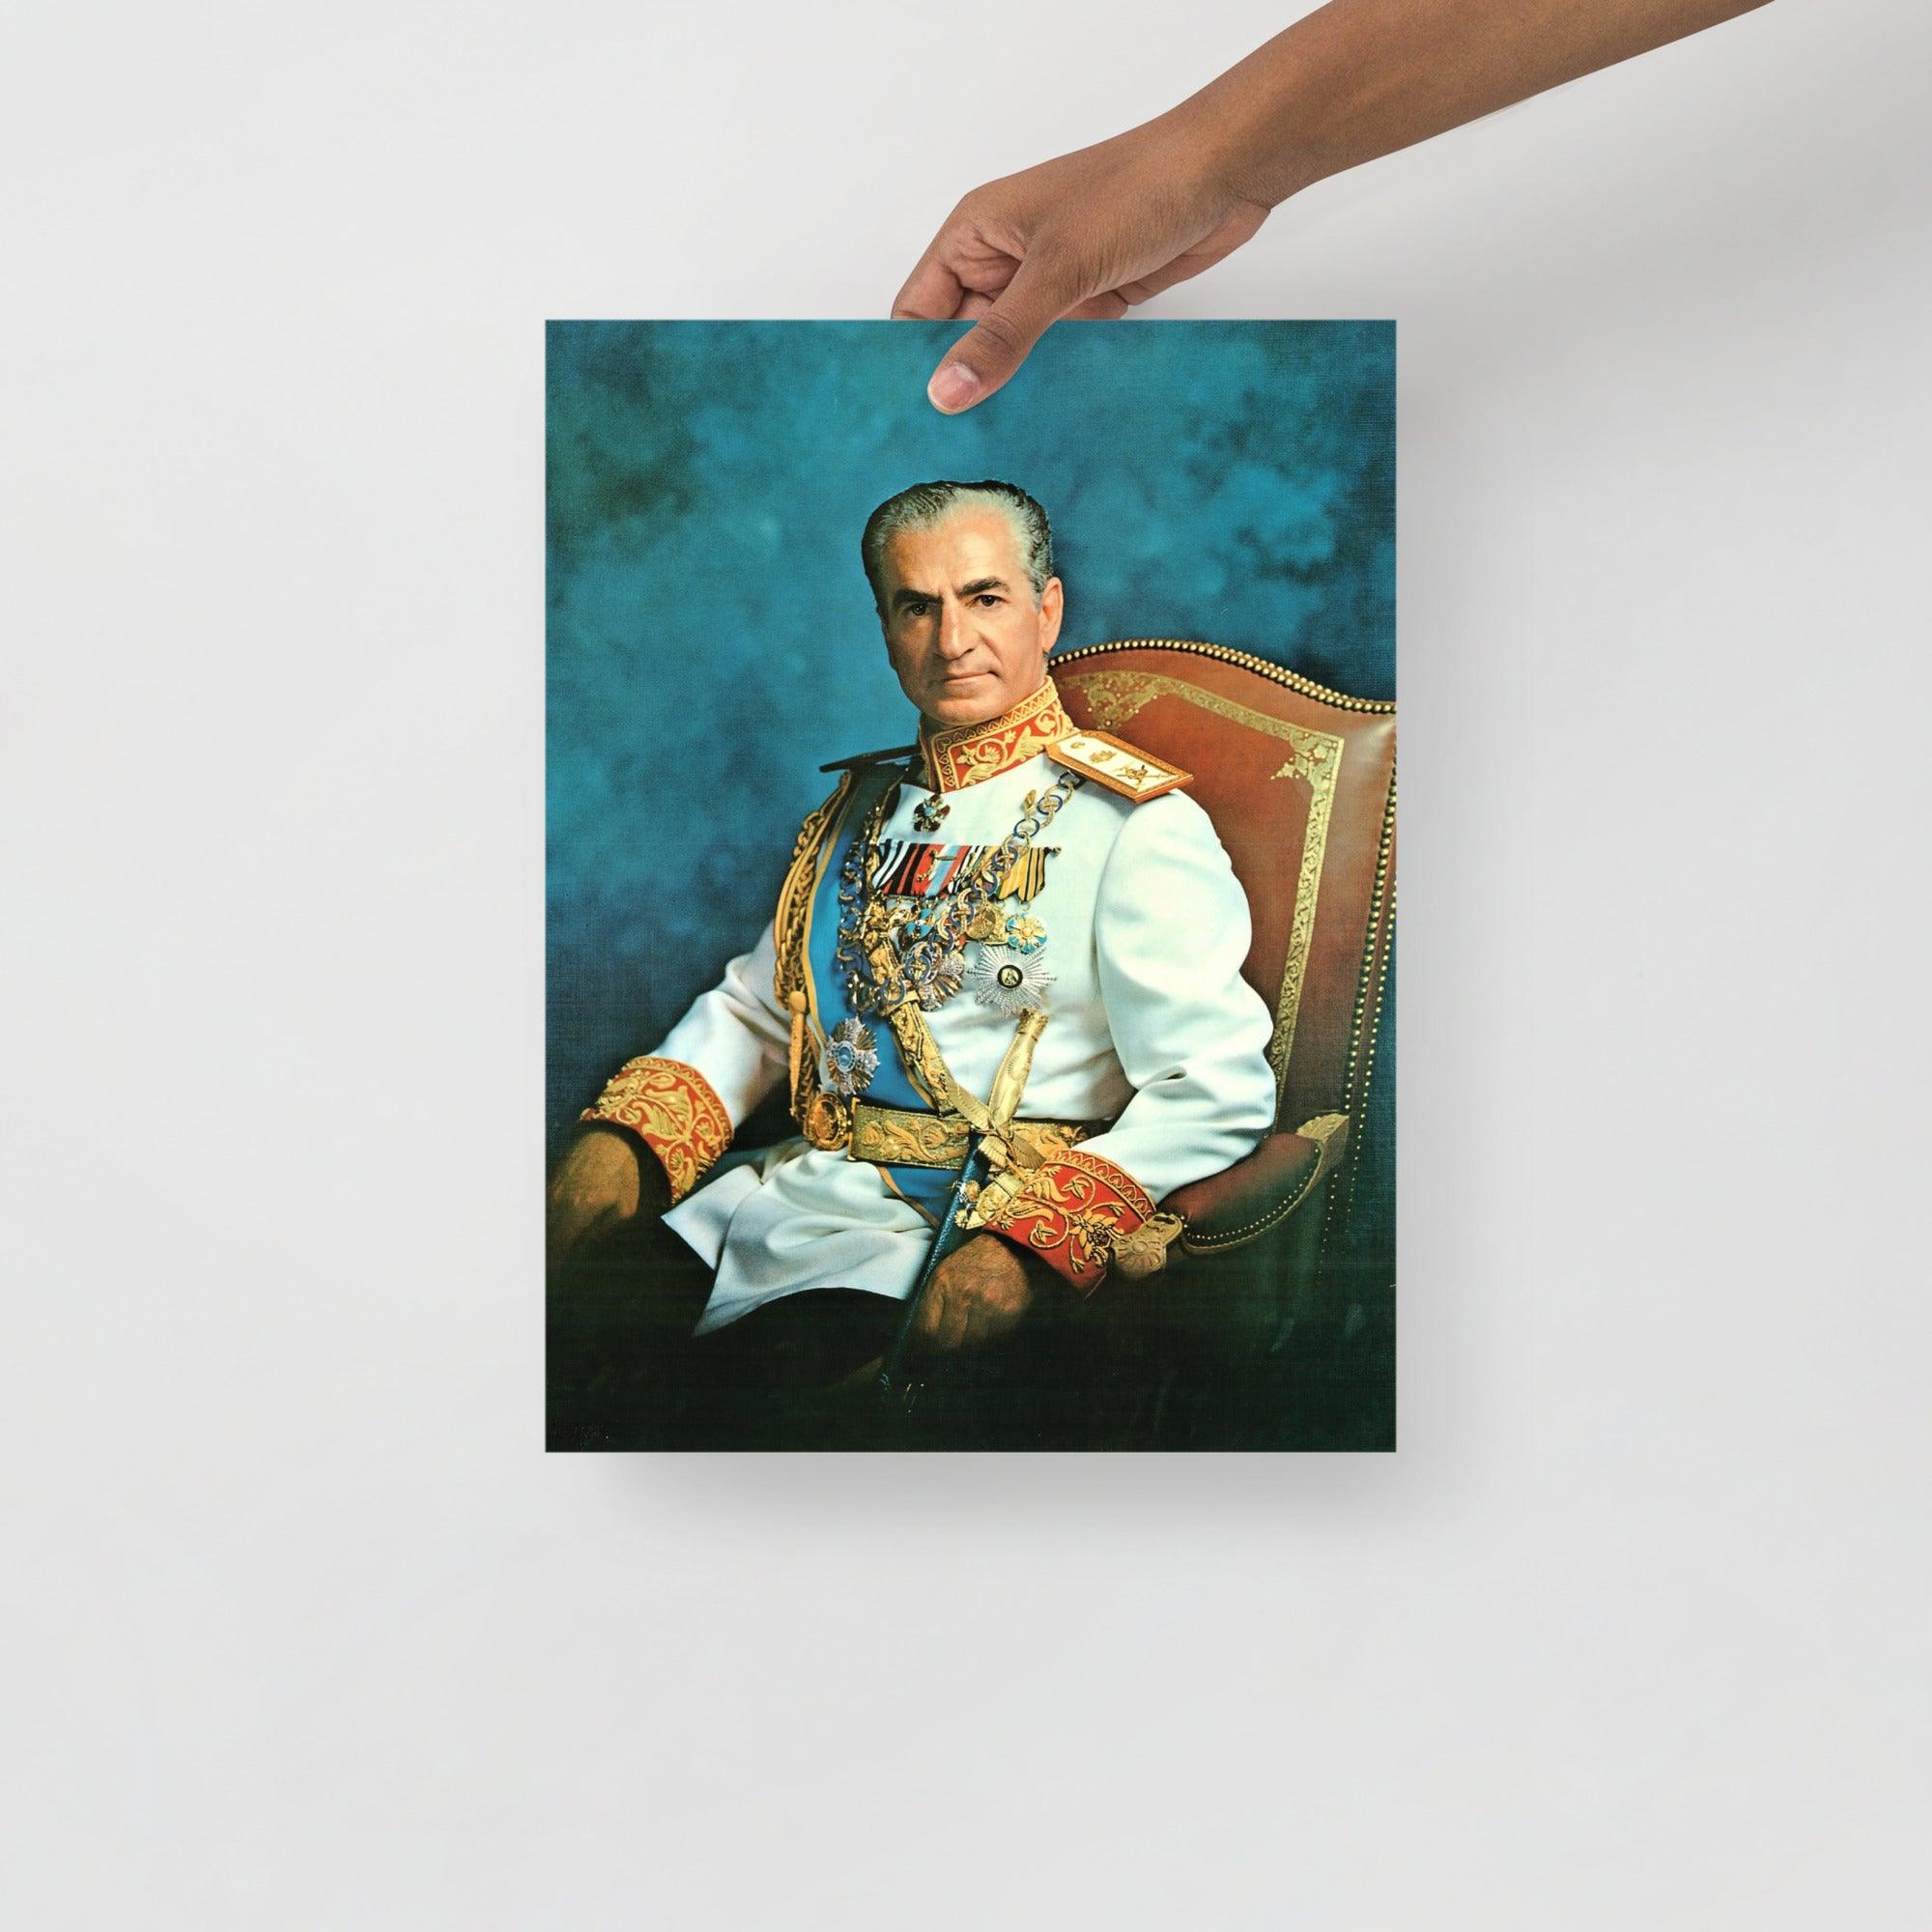 A Mohammad Reza Pahlavi poster on a plain backdrop in size 12x16”.